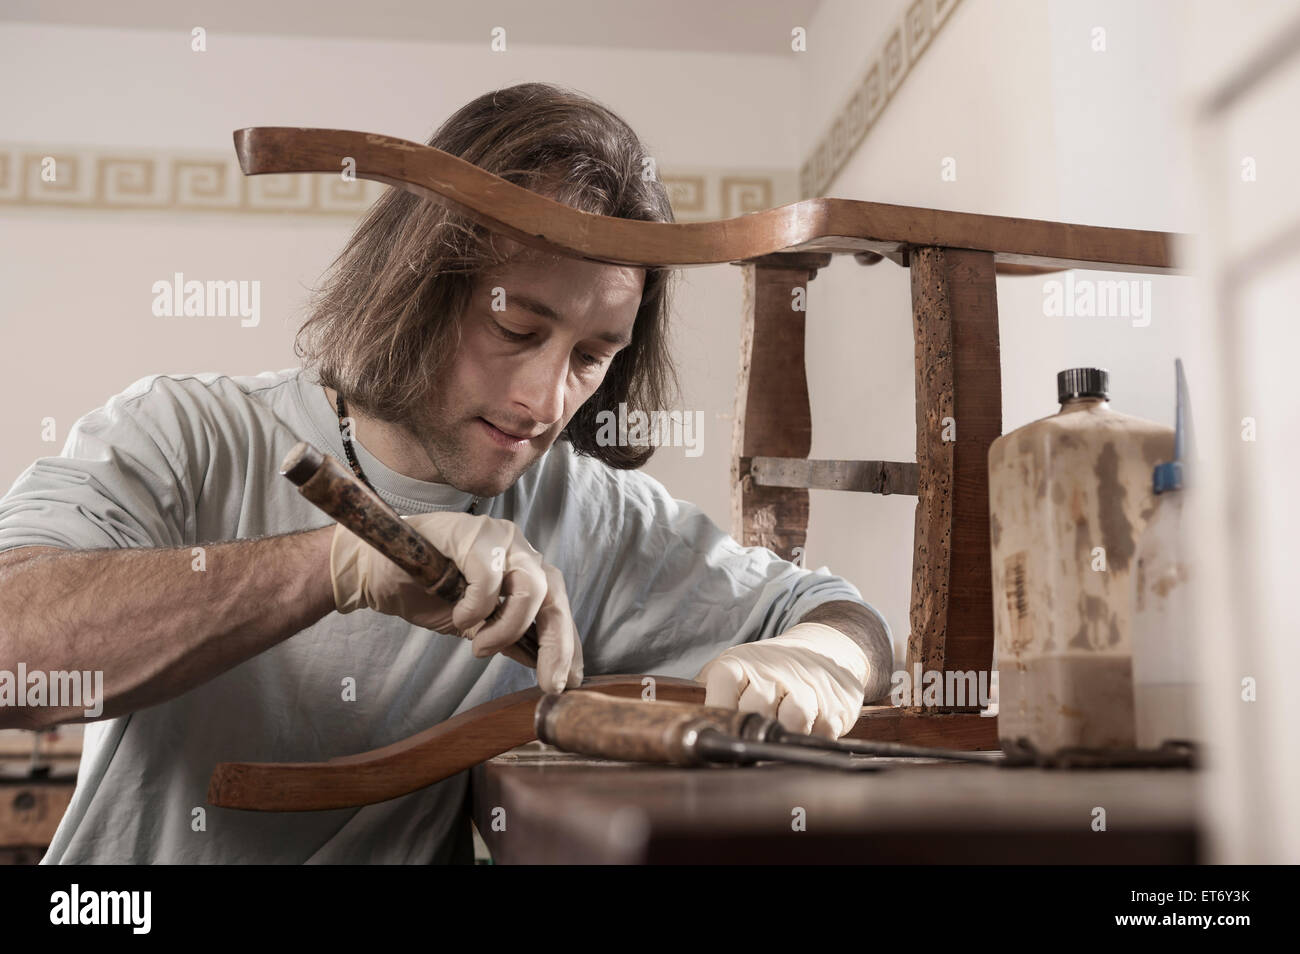 Carpenter repairing an antique wooden chair at workshop, Bavaria, Germany Stock Photo